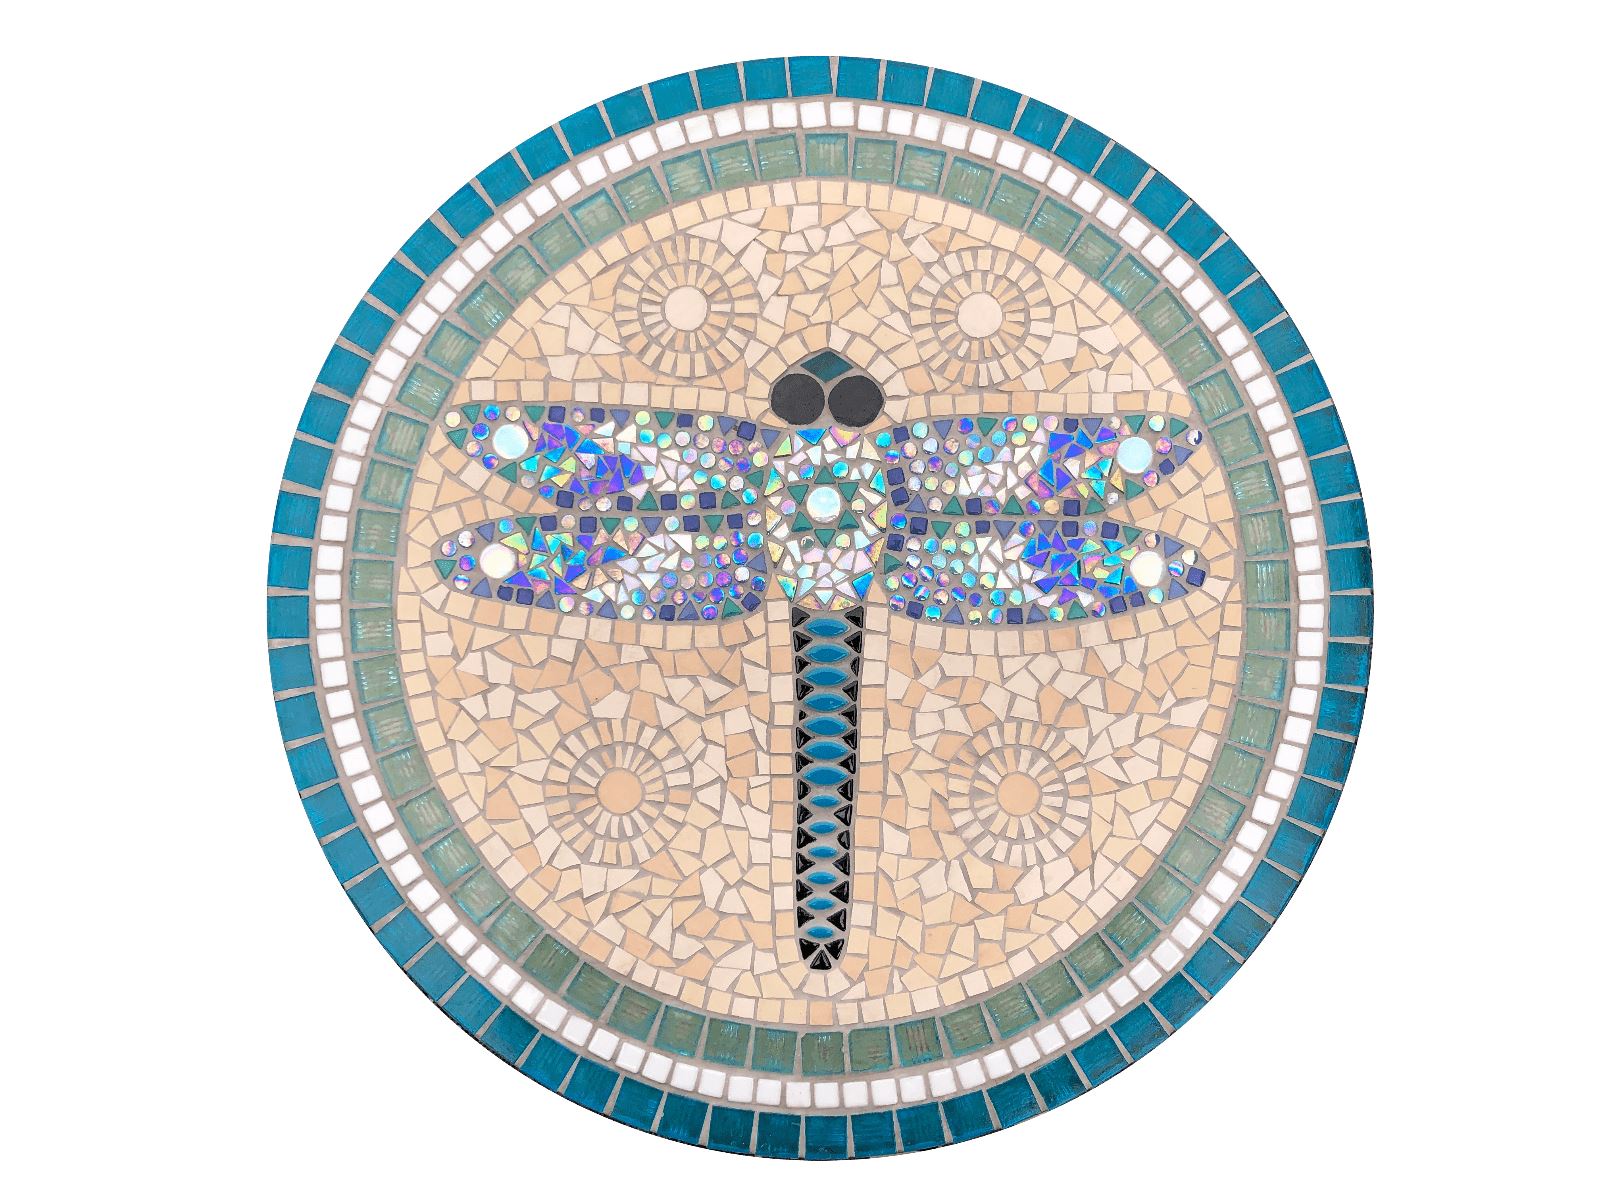 Kit - 50cm Emperor Dragonfly table top